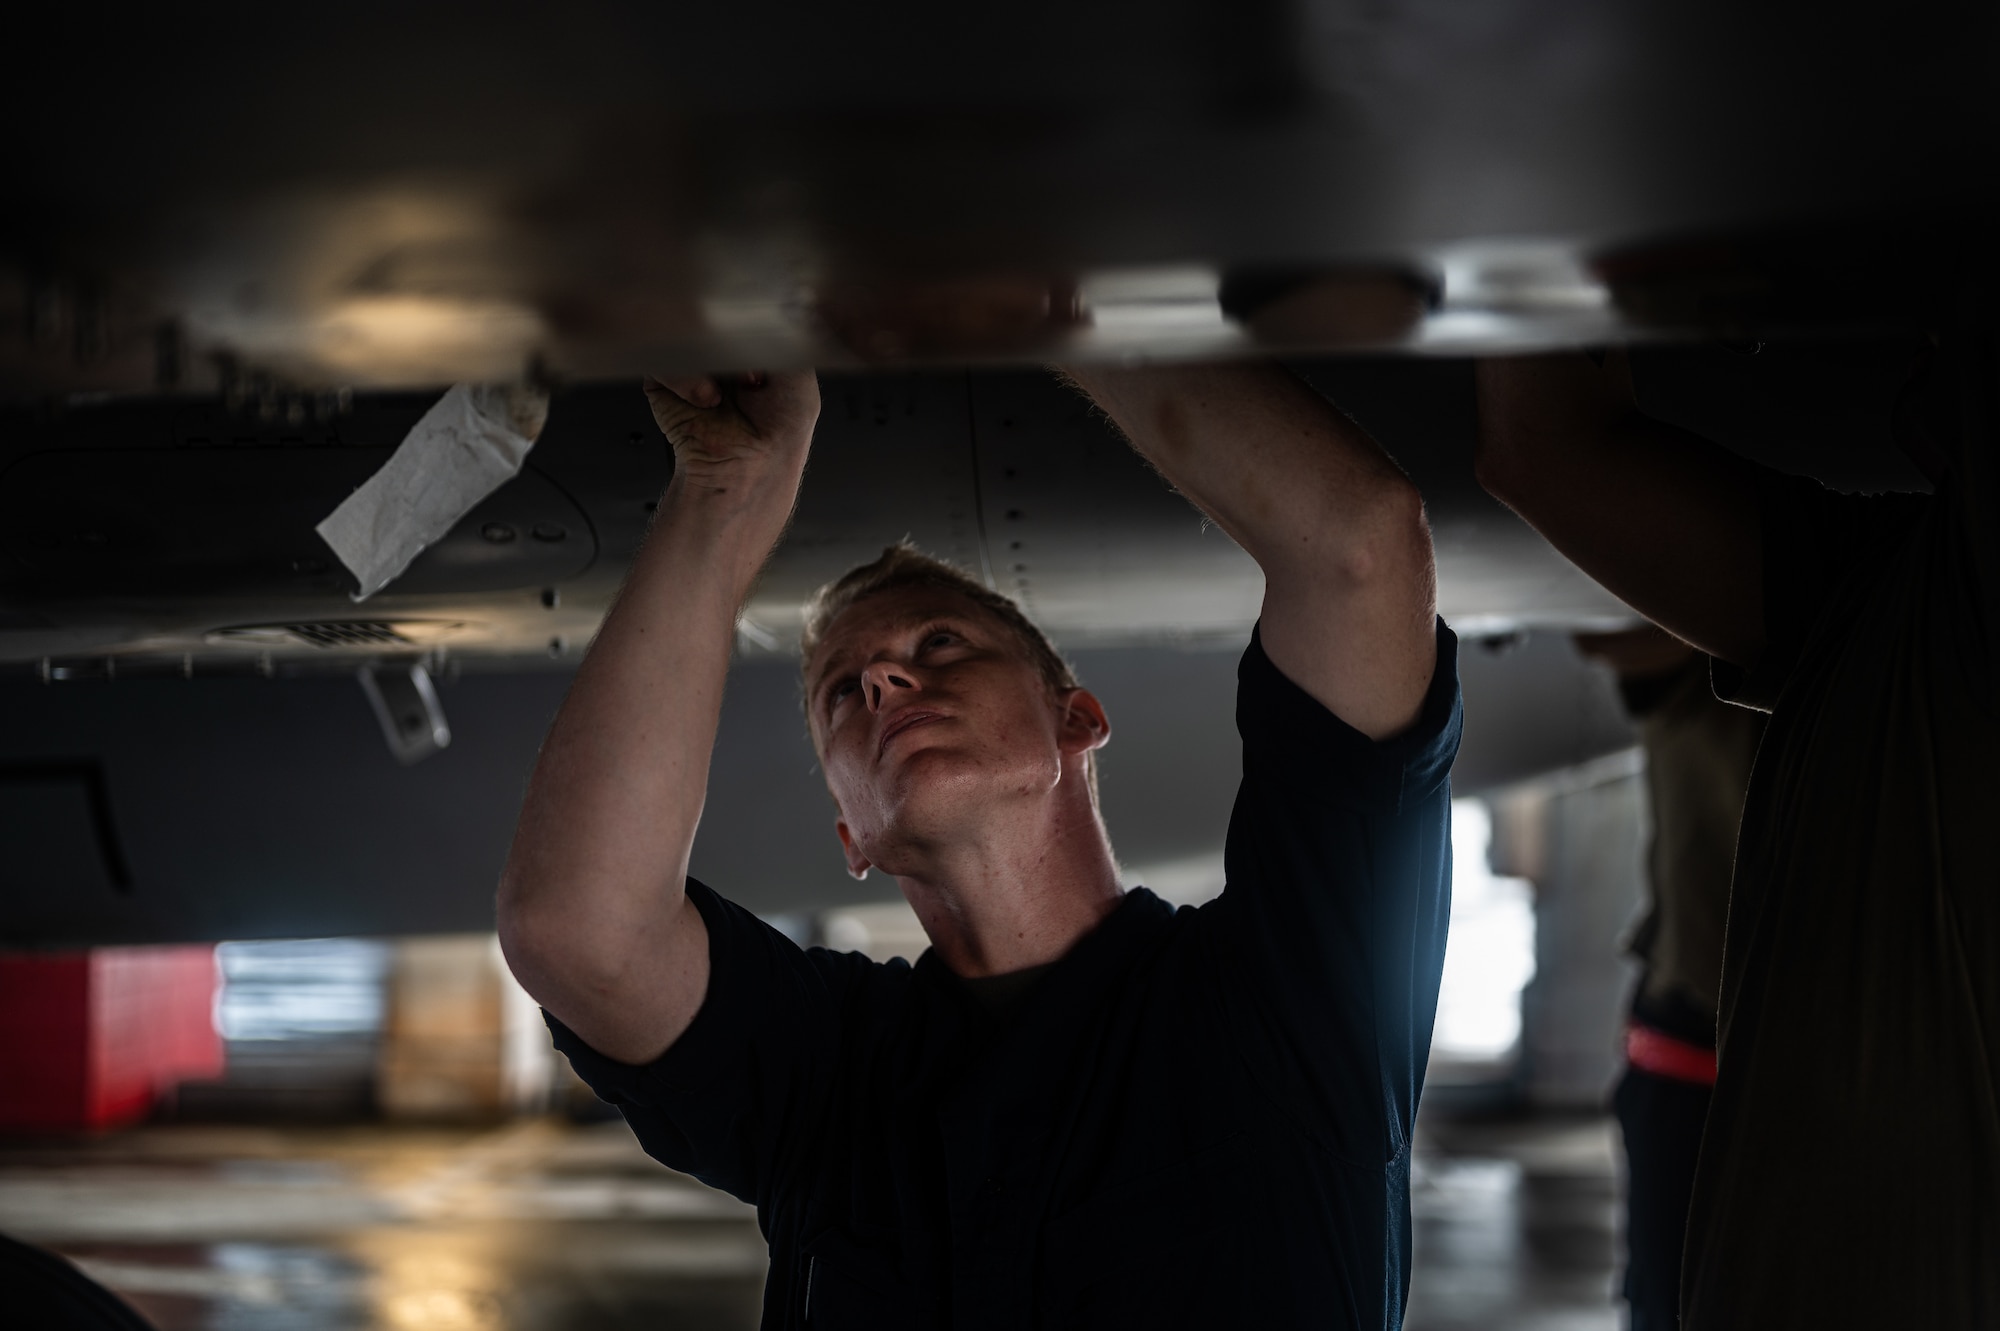 Airman works on aircraft.